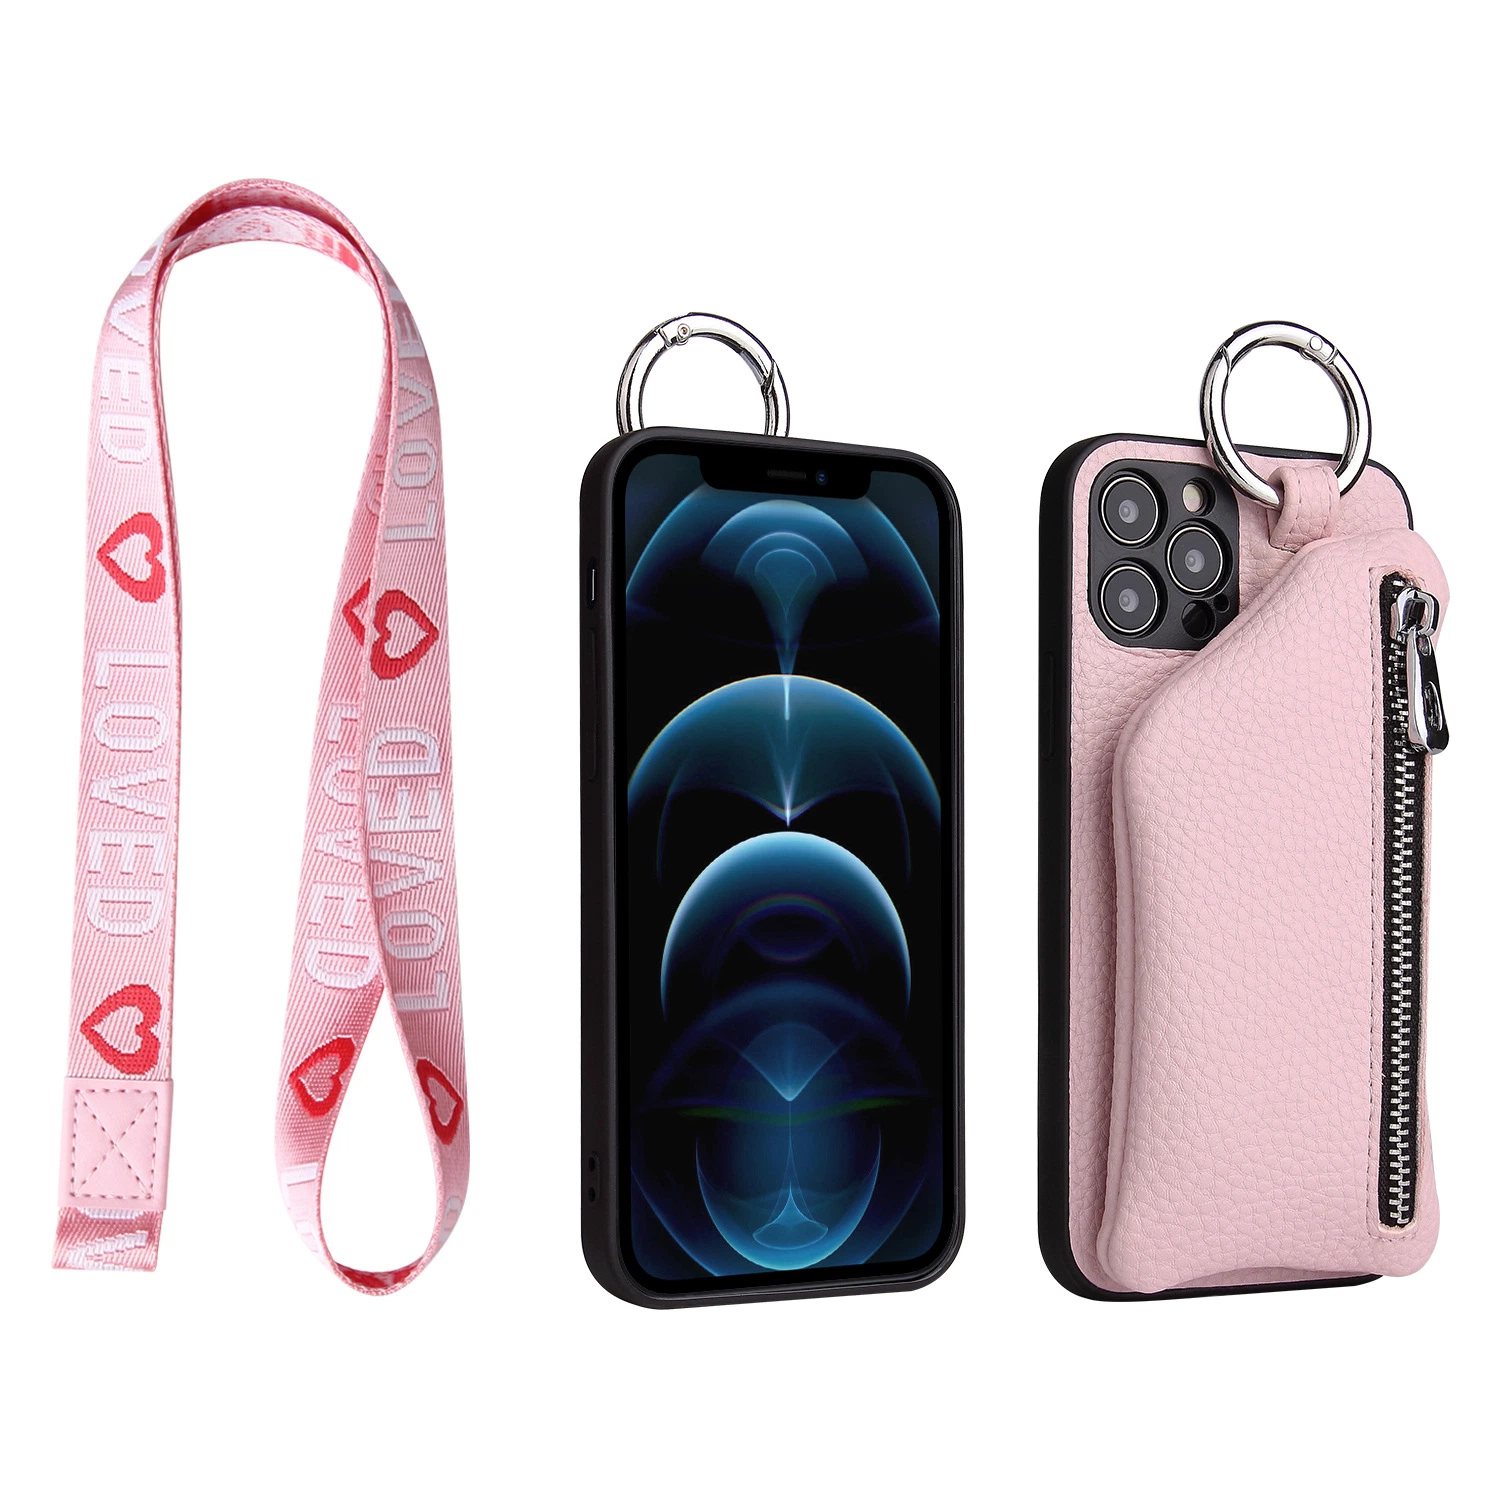 OEM Fashion Leather Lanyard Coin Purse for iPhone Leather Mobile Phone Shell